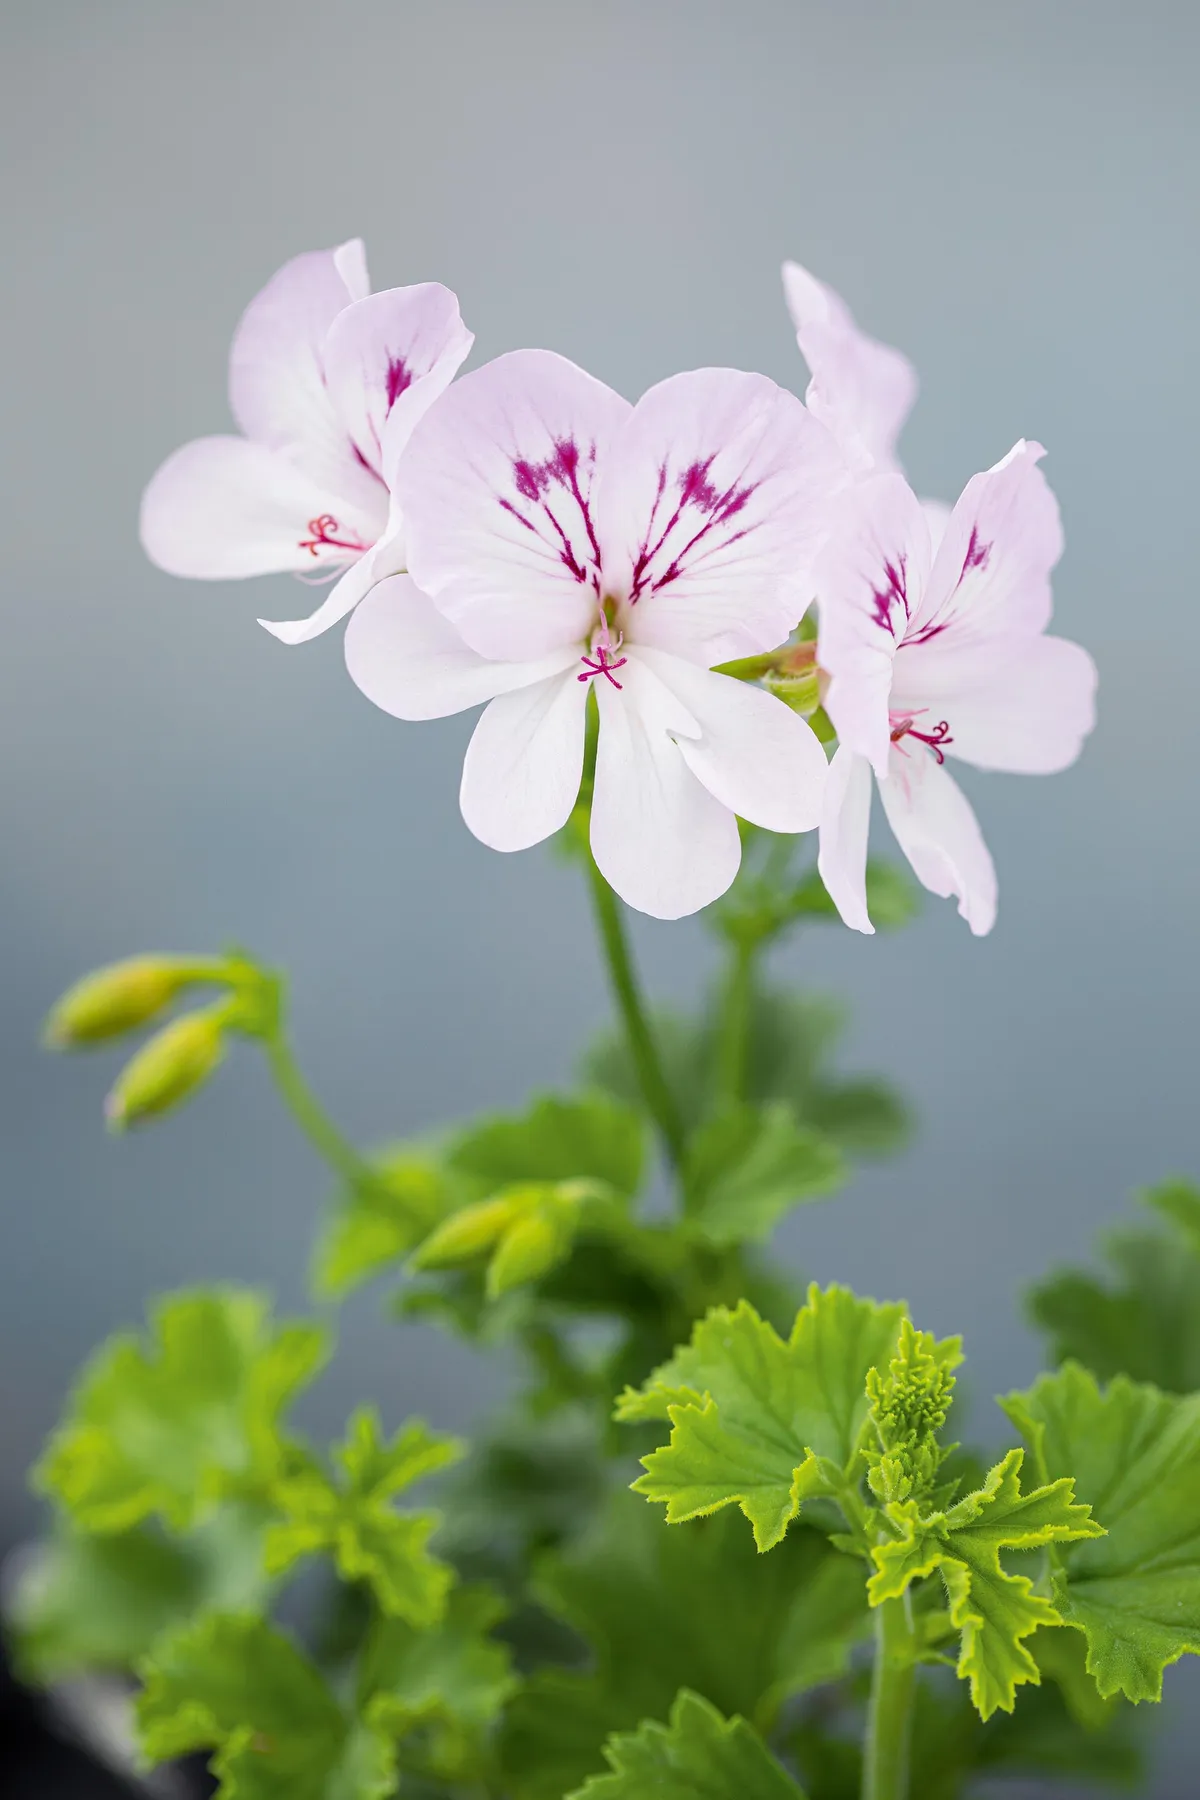 Pelargonium ‘Moon Maiden’. A pretty plant, notable for its unusually large flowers for this group. The plant is well branched and the simple yet attractive blooms are almost white with a hint of lilac in the upper petals and delicate, purple blotches and feathering. 25cm. RHS H1C, USDA 9b-13.